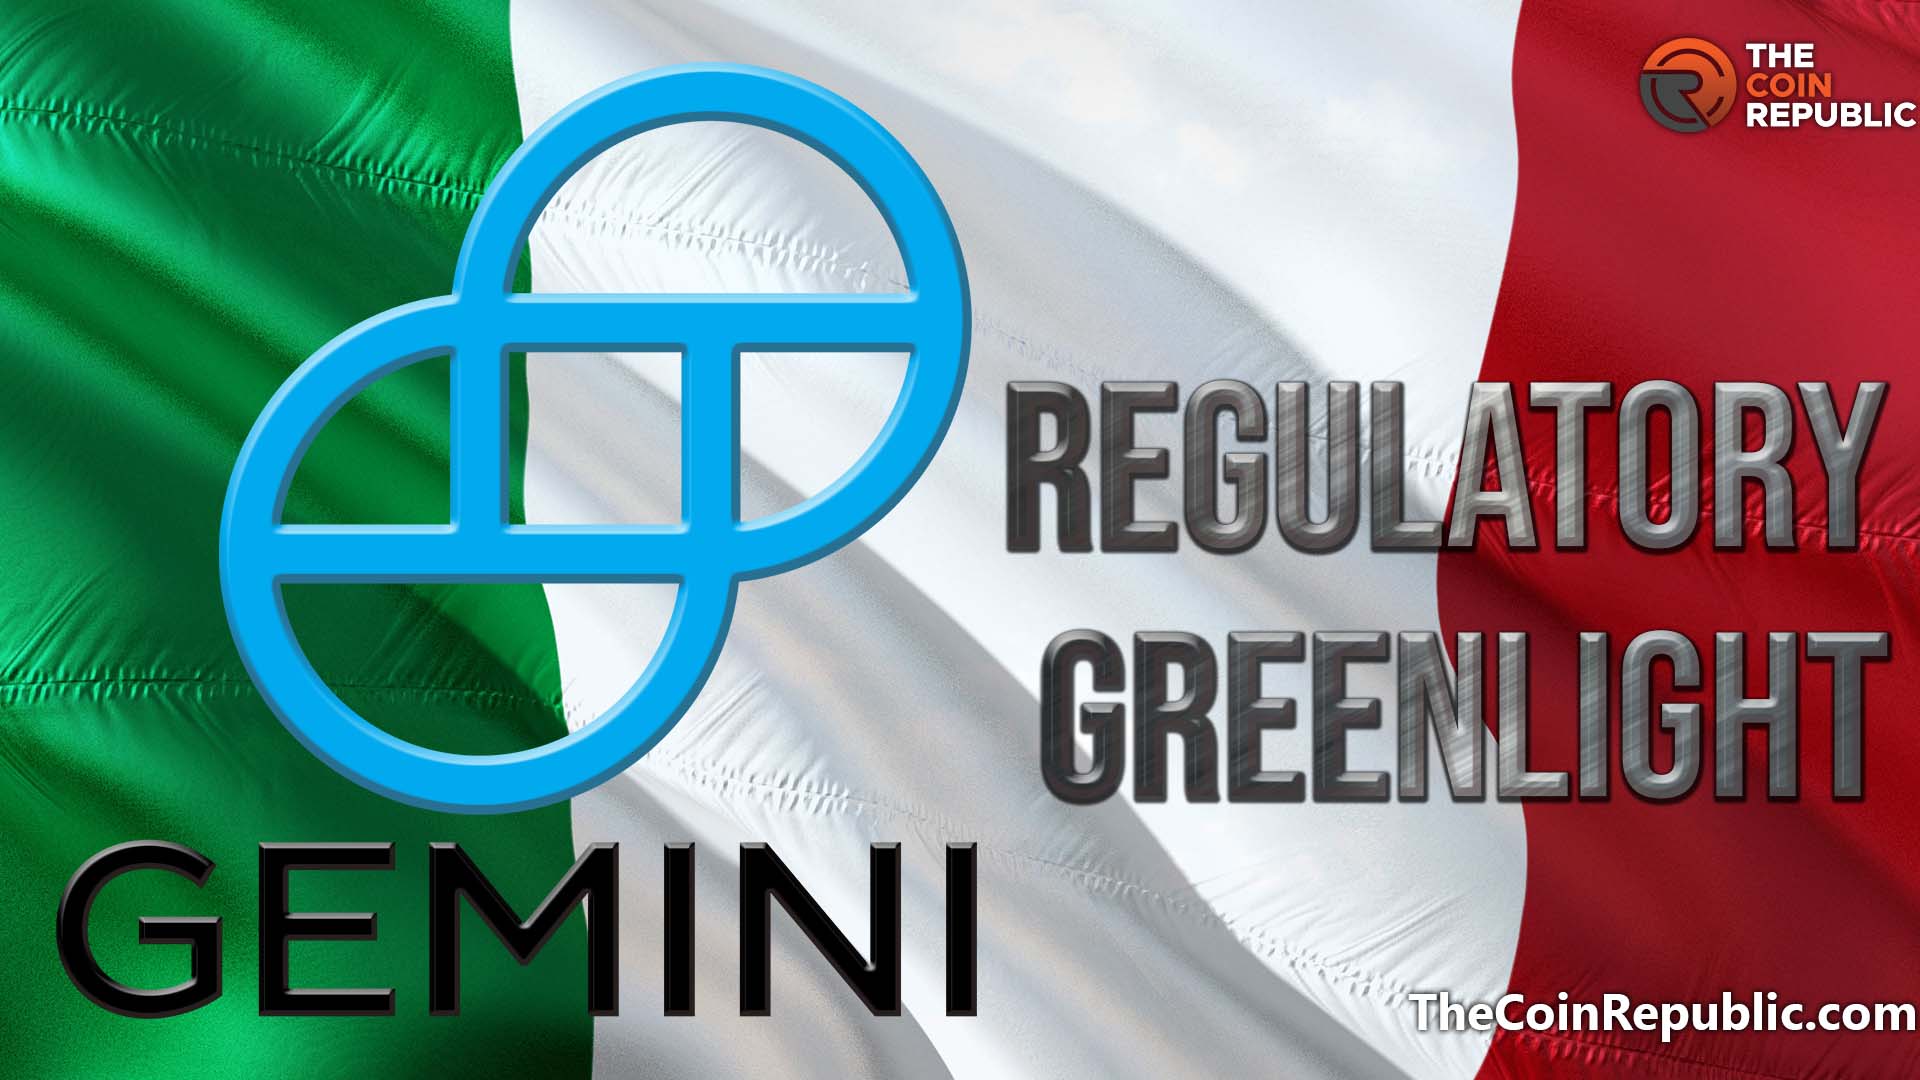 Gemini gets governing approval in Italy and Greece in between the lending suspension